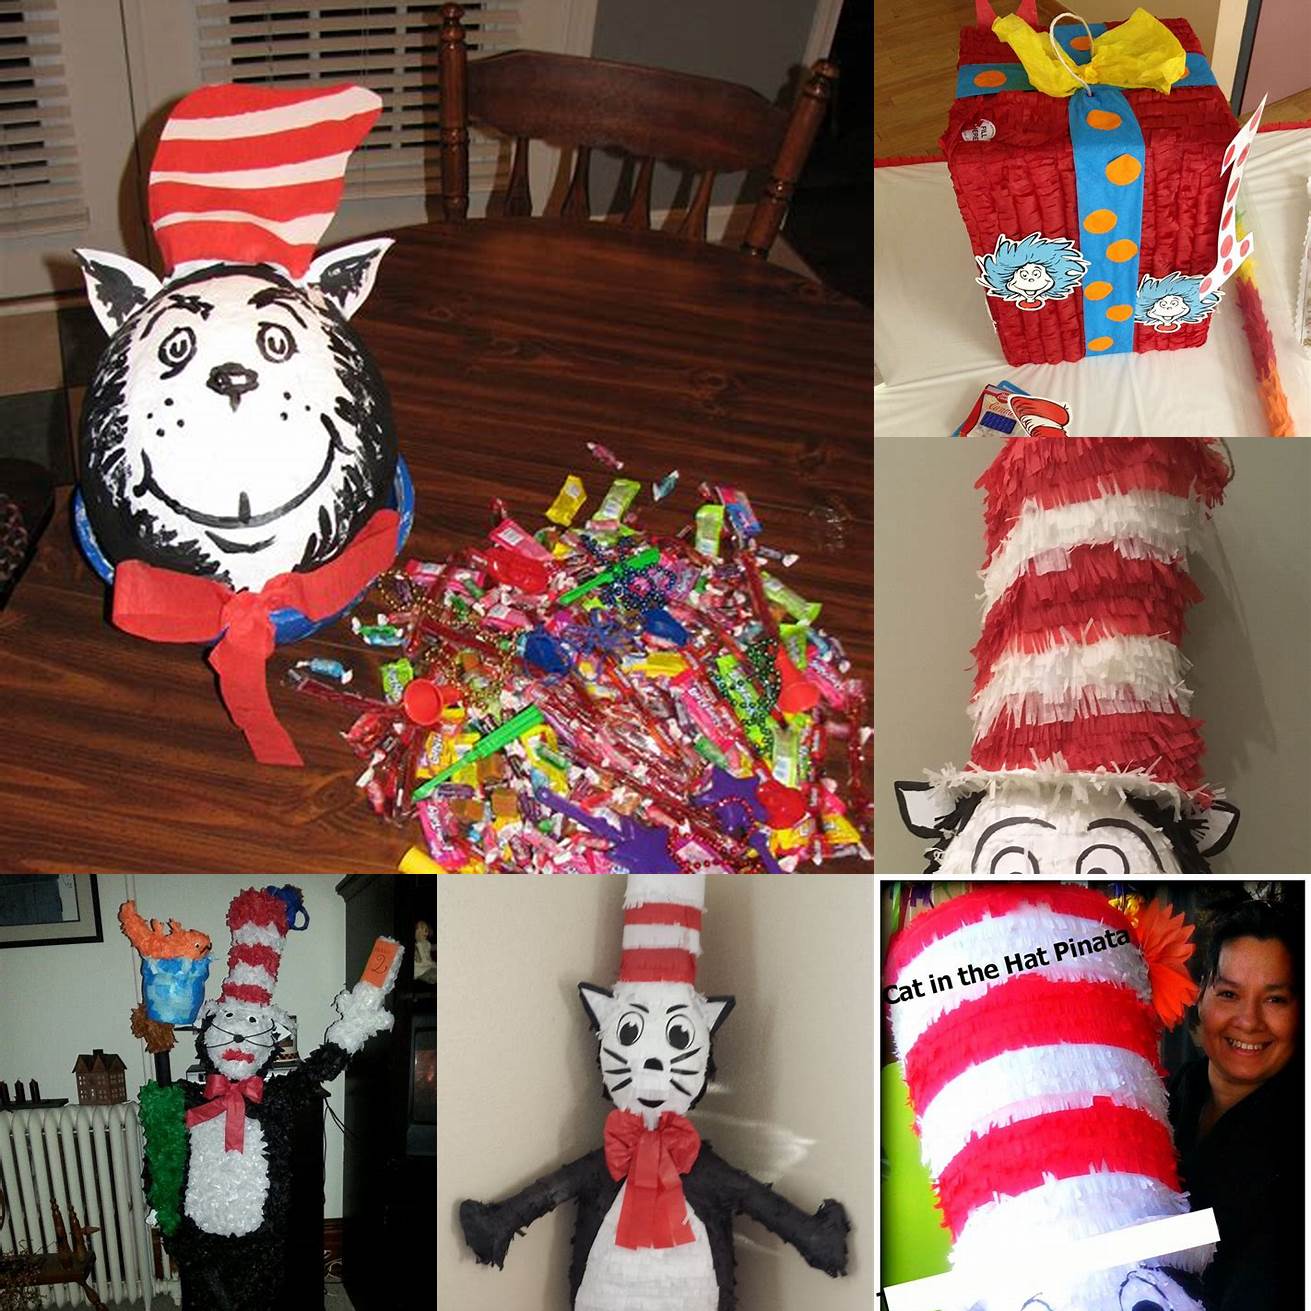 1 Cat in the Hat Pinata with colorful candies and toys inside